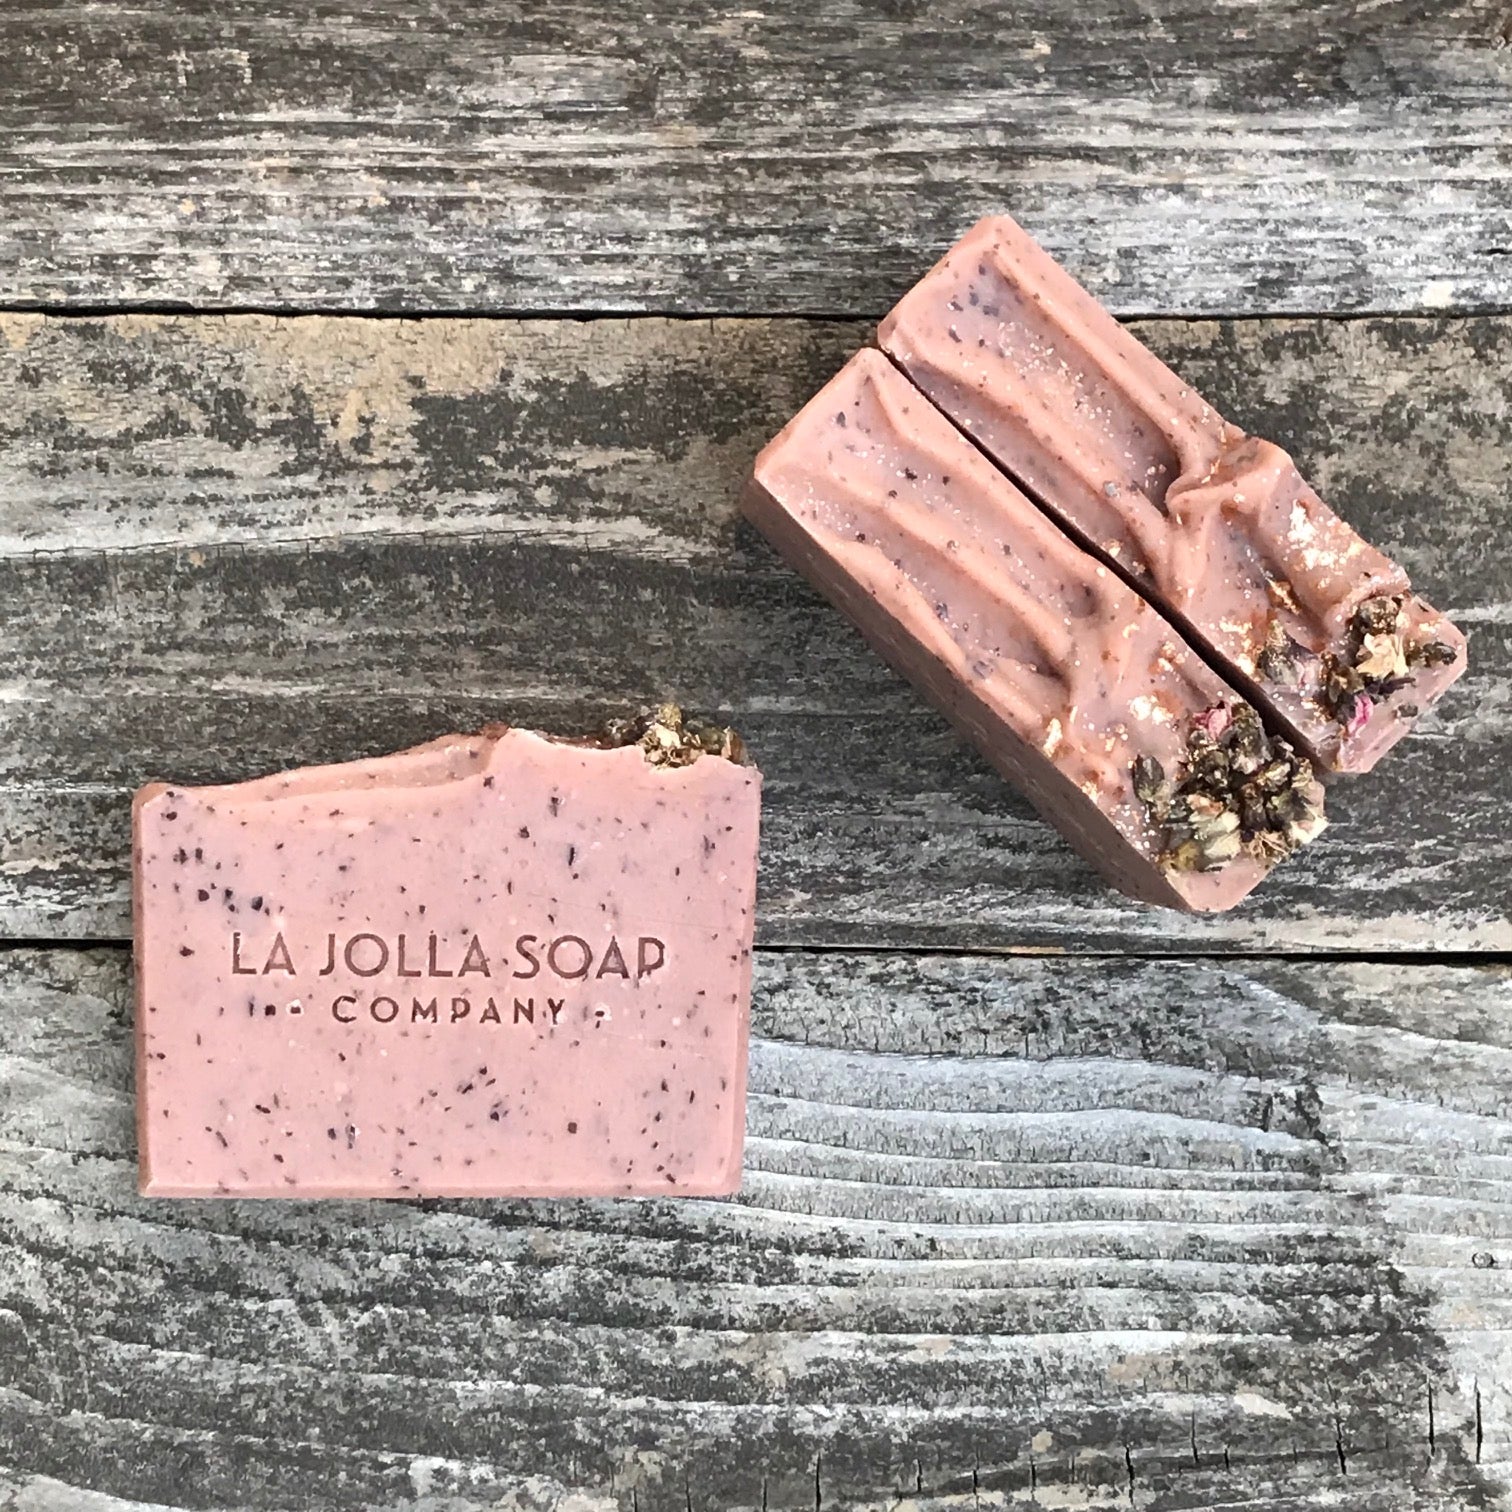 Nourish, cleanse and exfoliate leaving your skin feeling fresh and conditioned. La Jolla soap Company